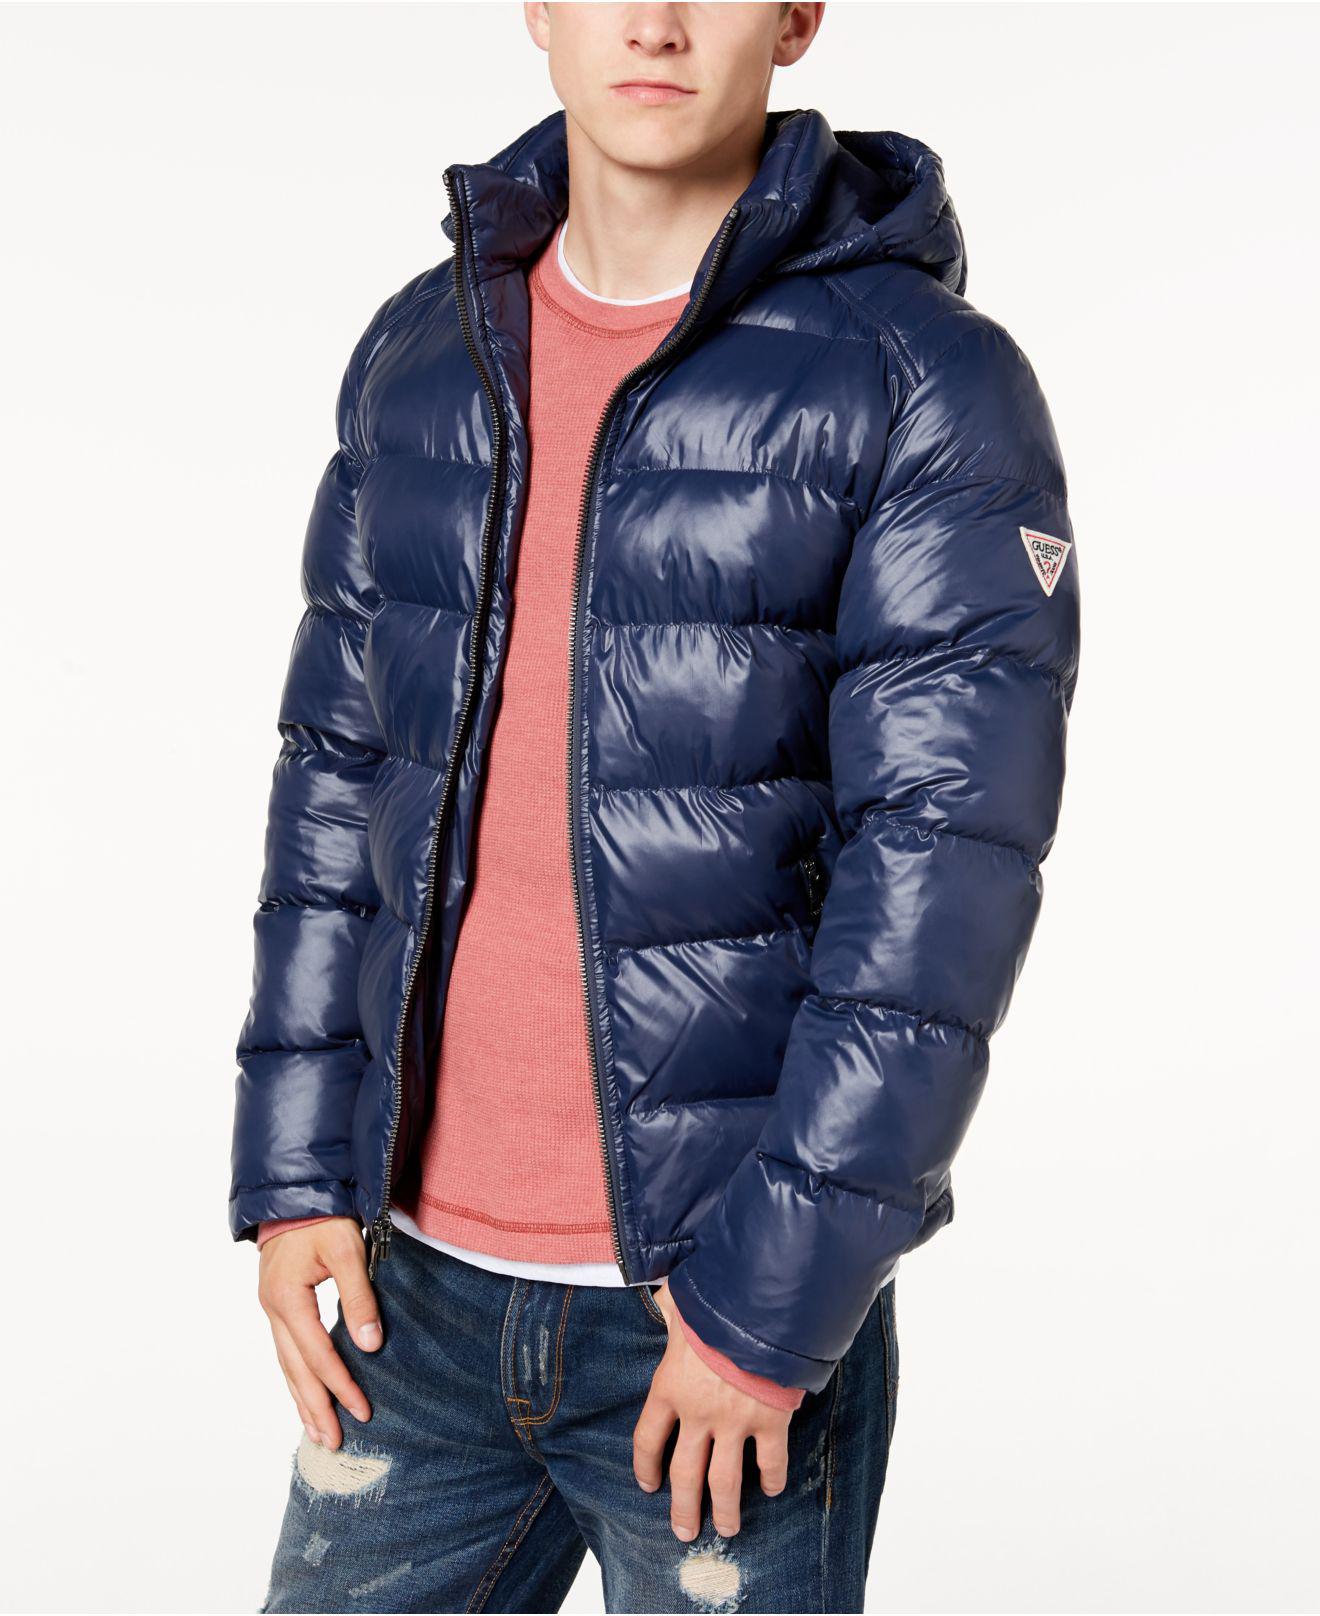 Anthony Logo Puffer Jacket GUESS | escapeauthority.com